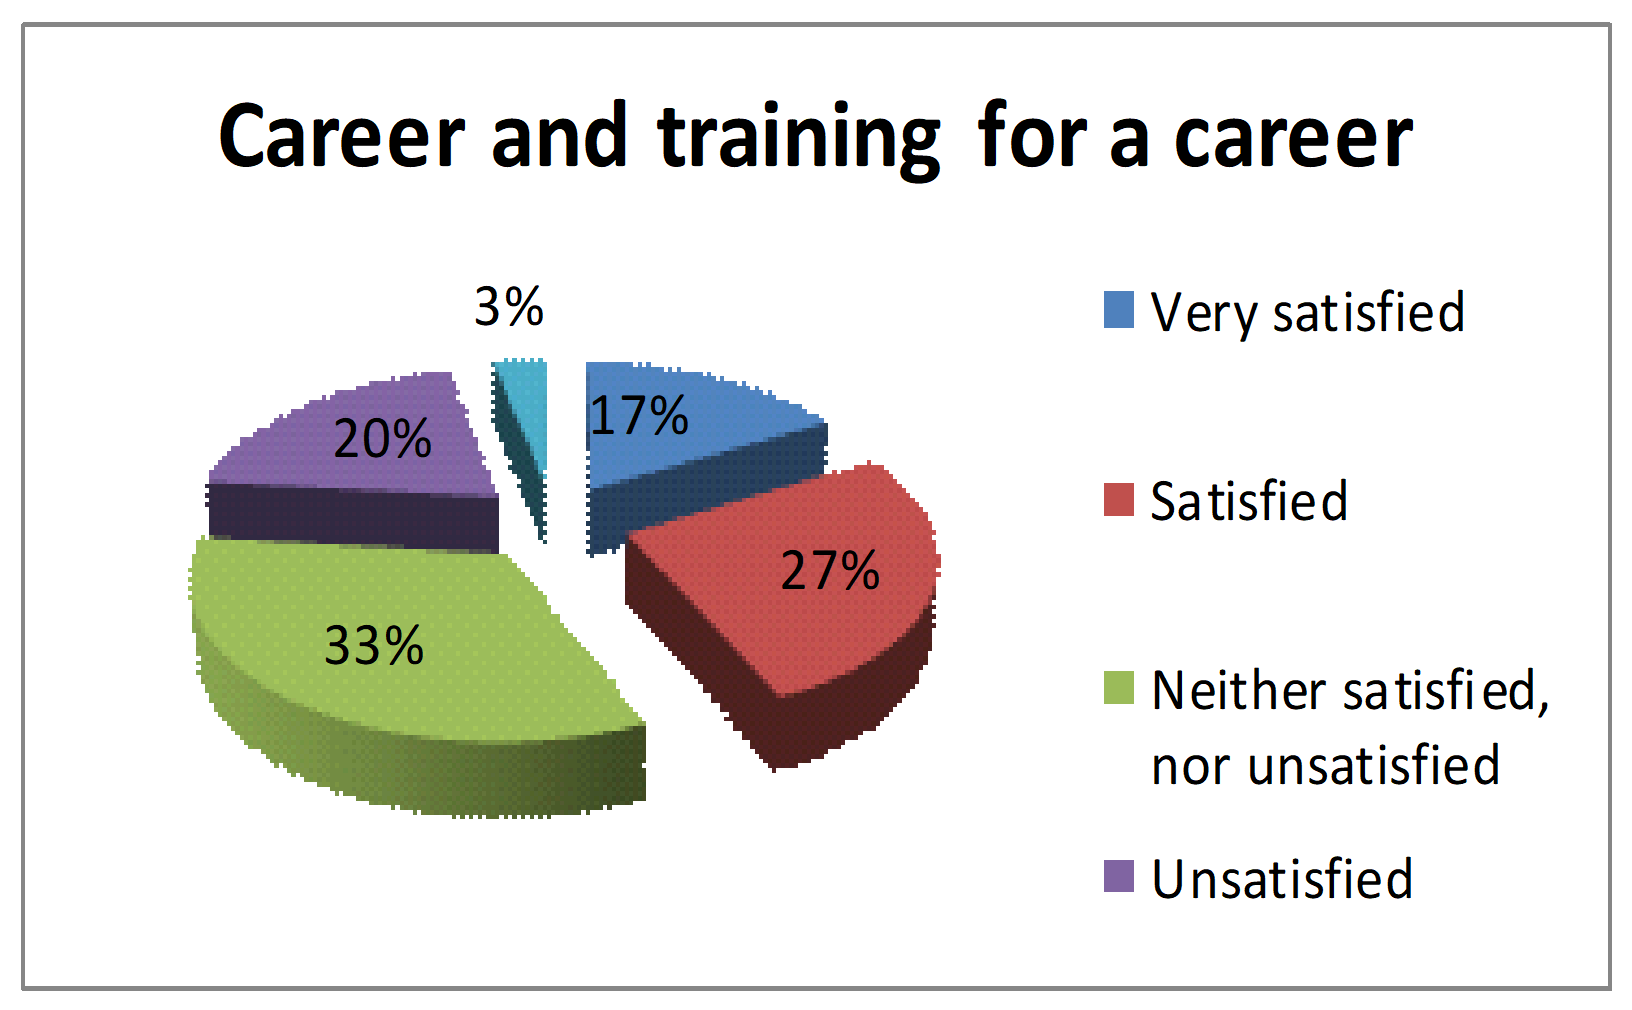 Career and training for a career